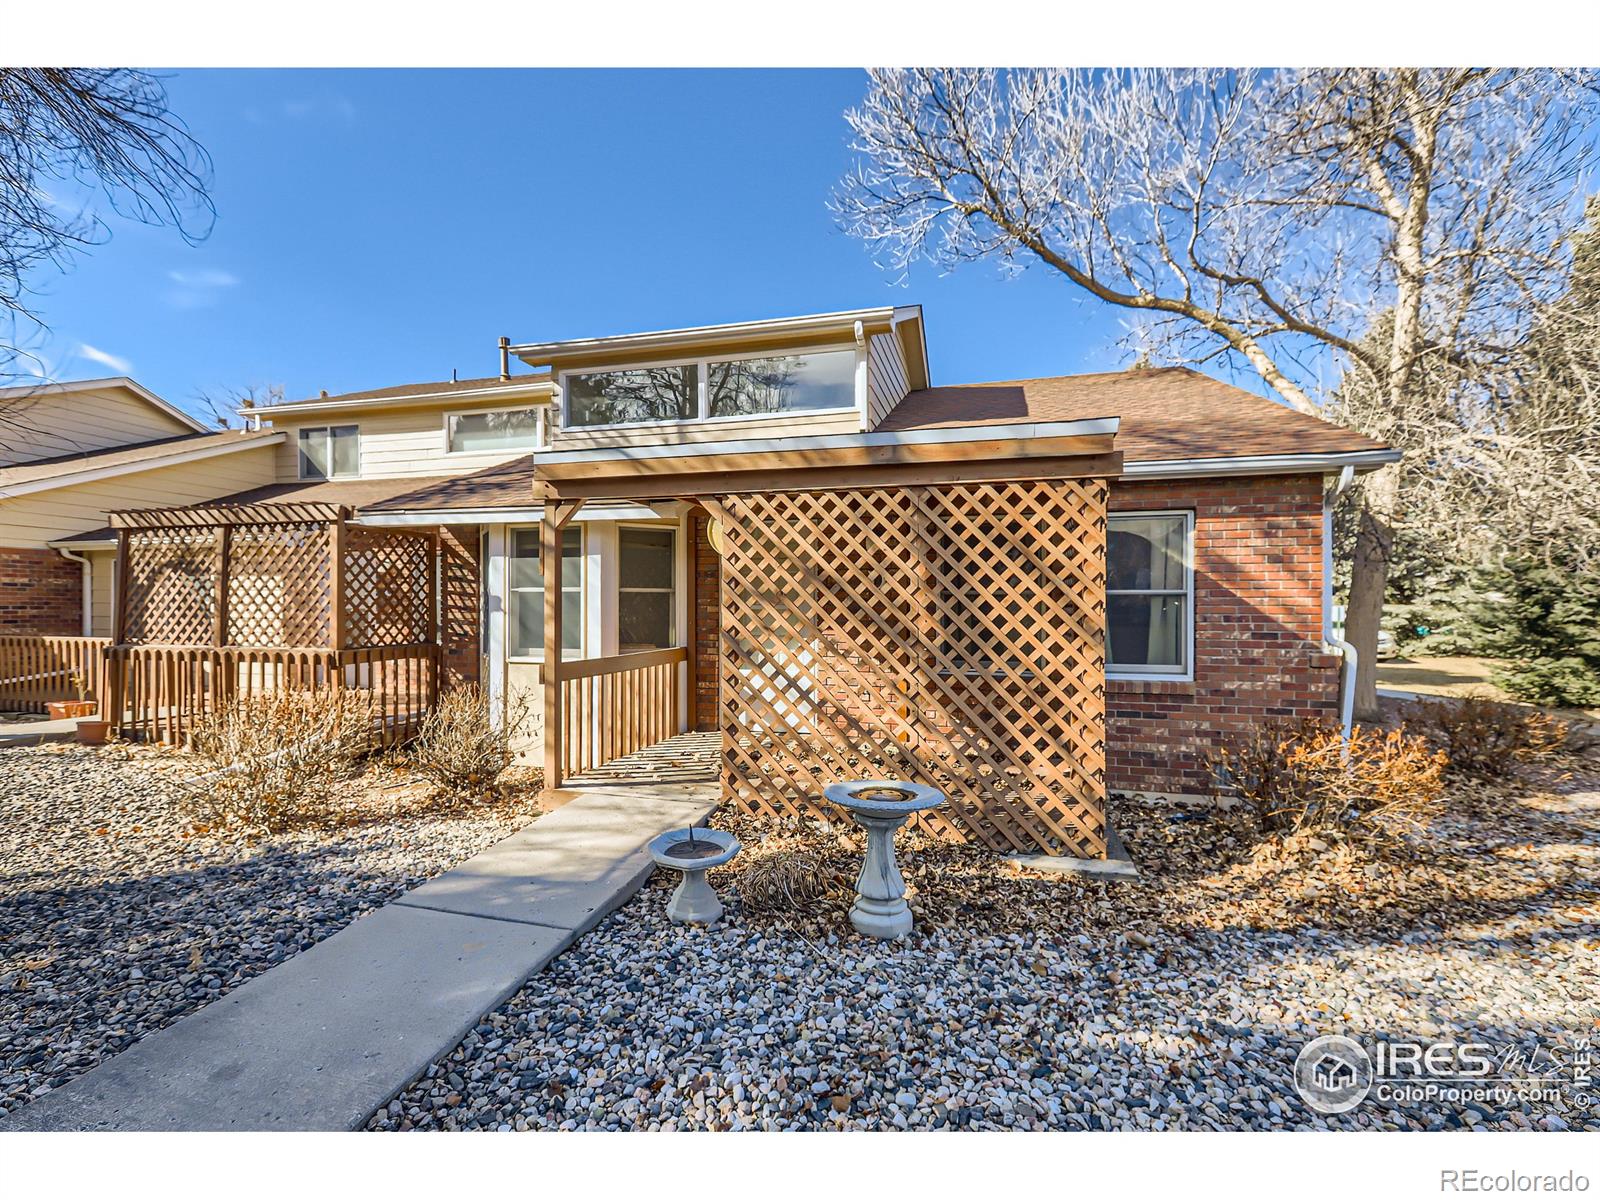 3400  laredo lane, fort collins sold home. Closed on 2024-05-09 for $370,000.